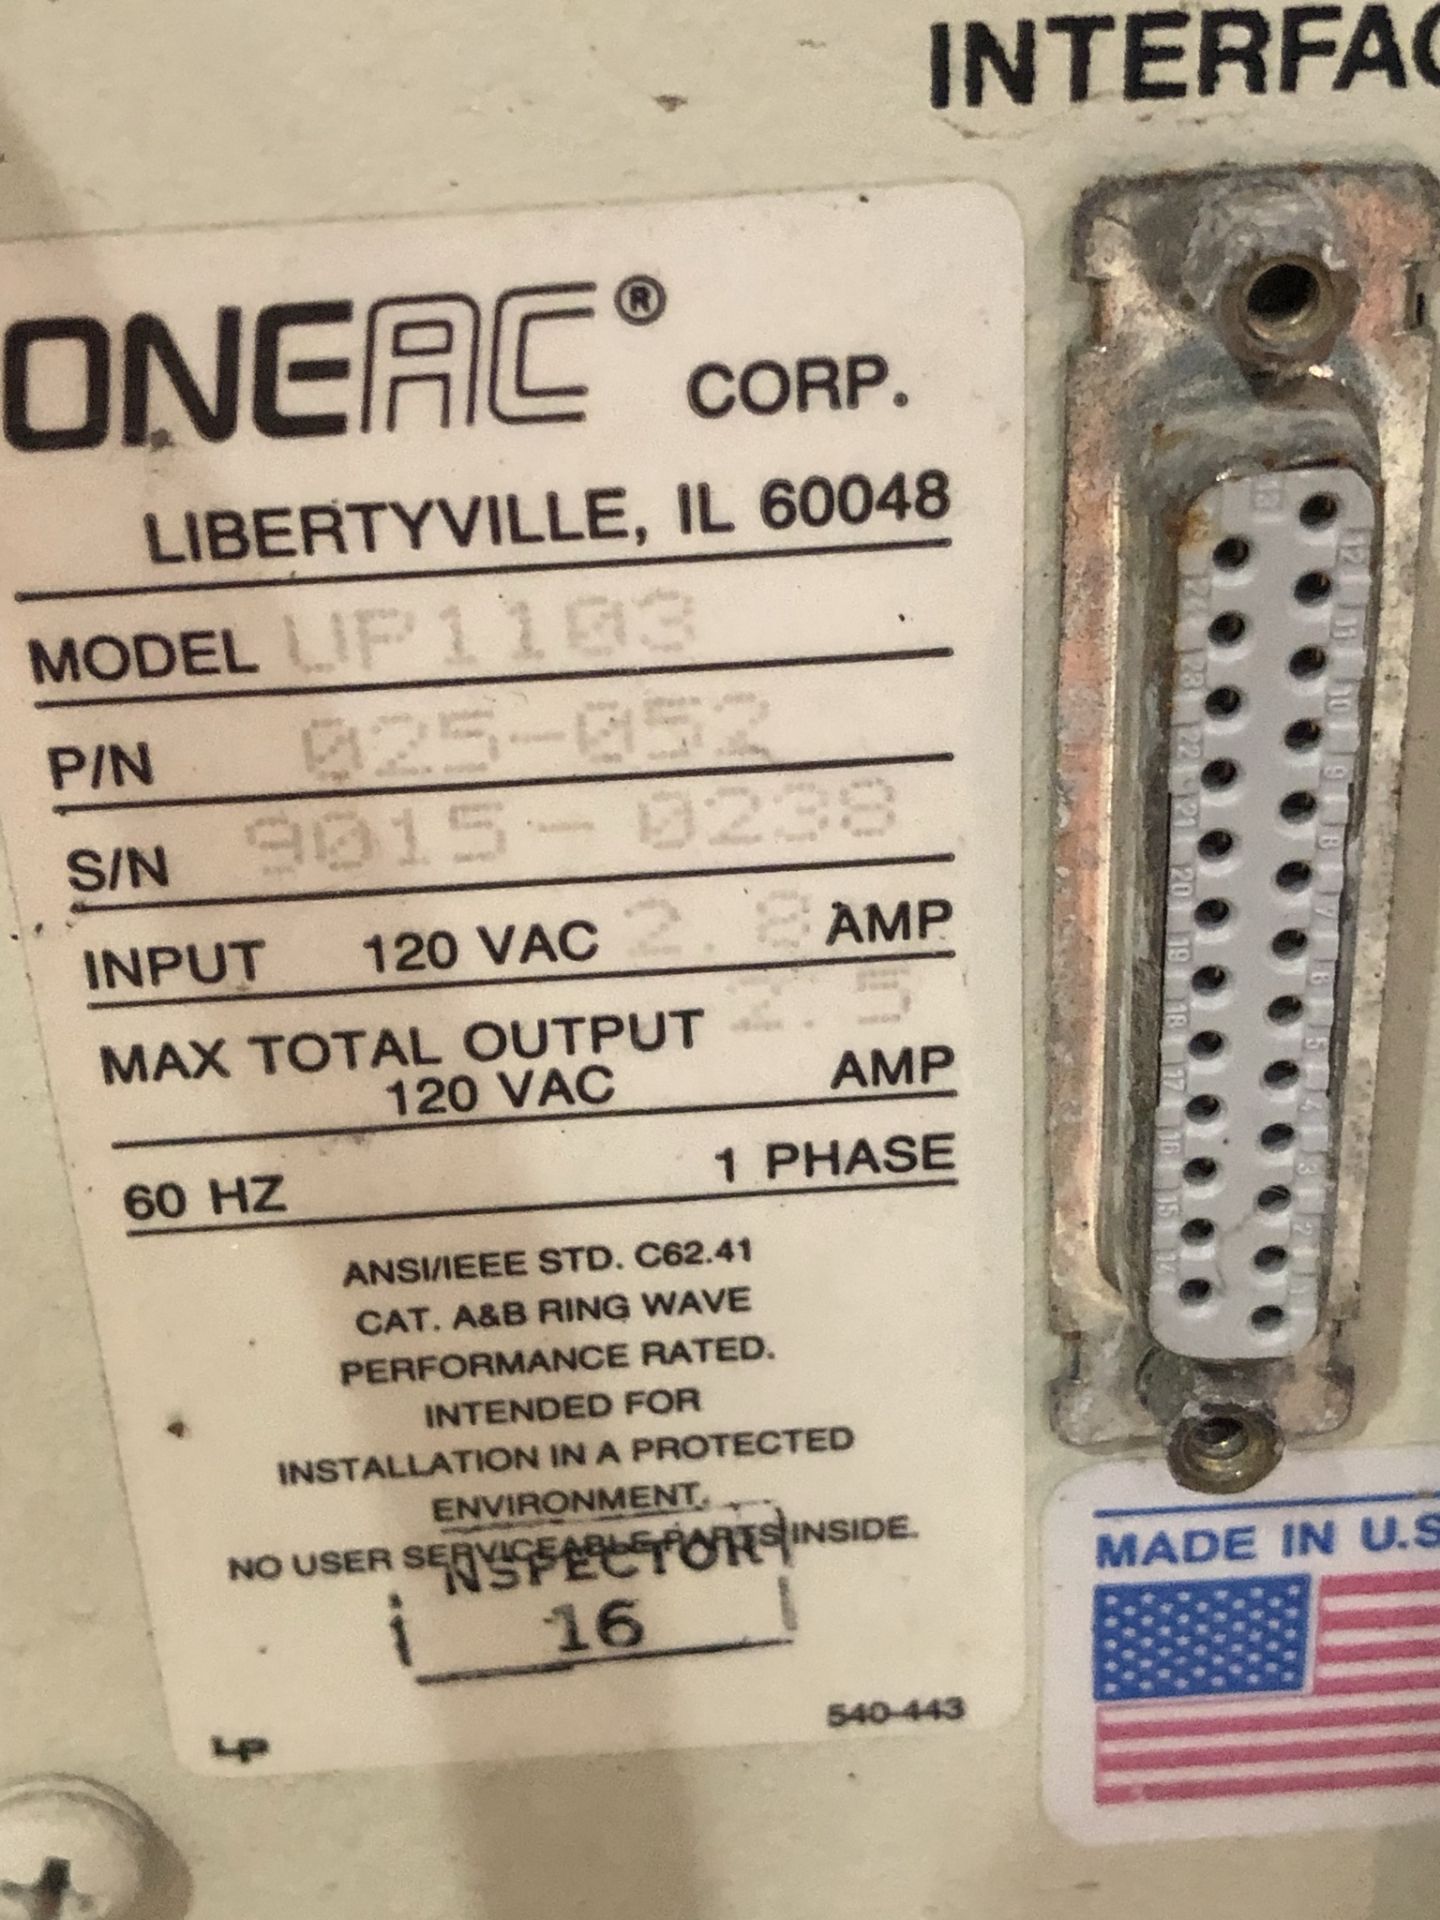 Oneac Corp., Quantity 10, Model UP1103, Uninterruptable Power Supplies (see detail PDF) - Image 4 of 11